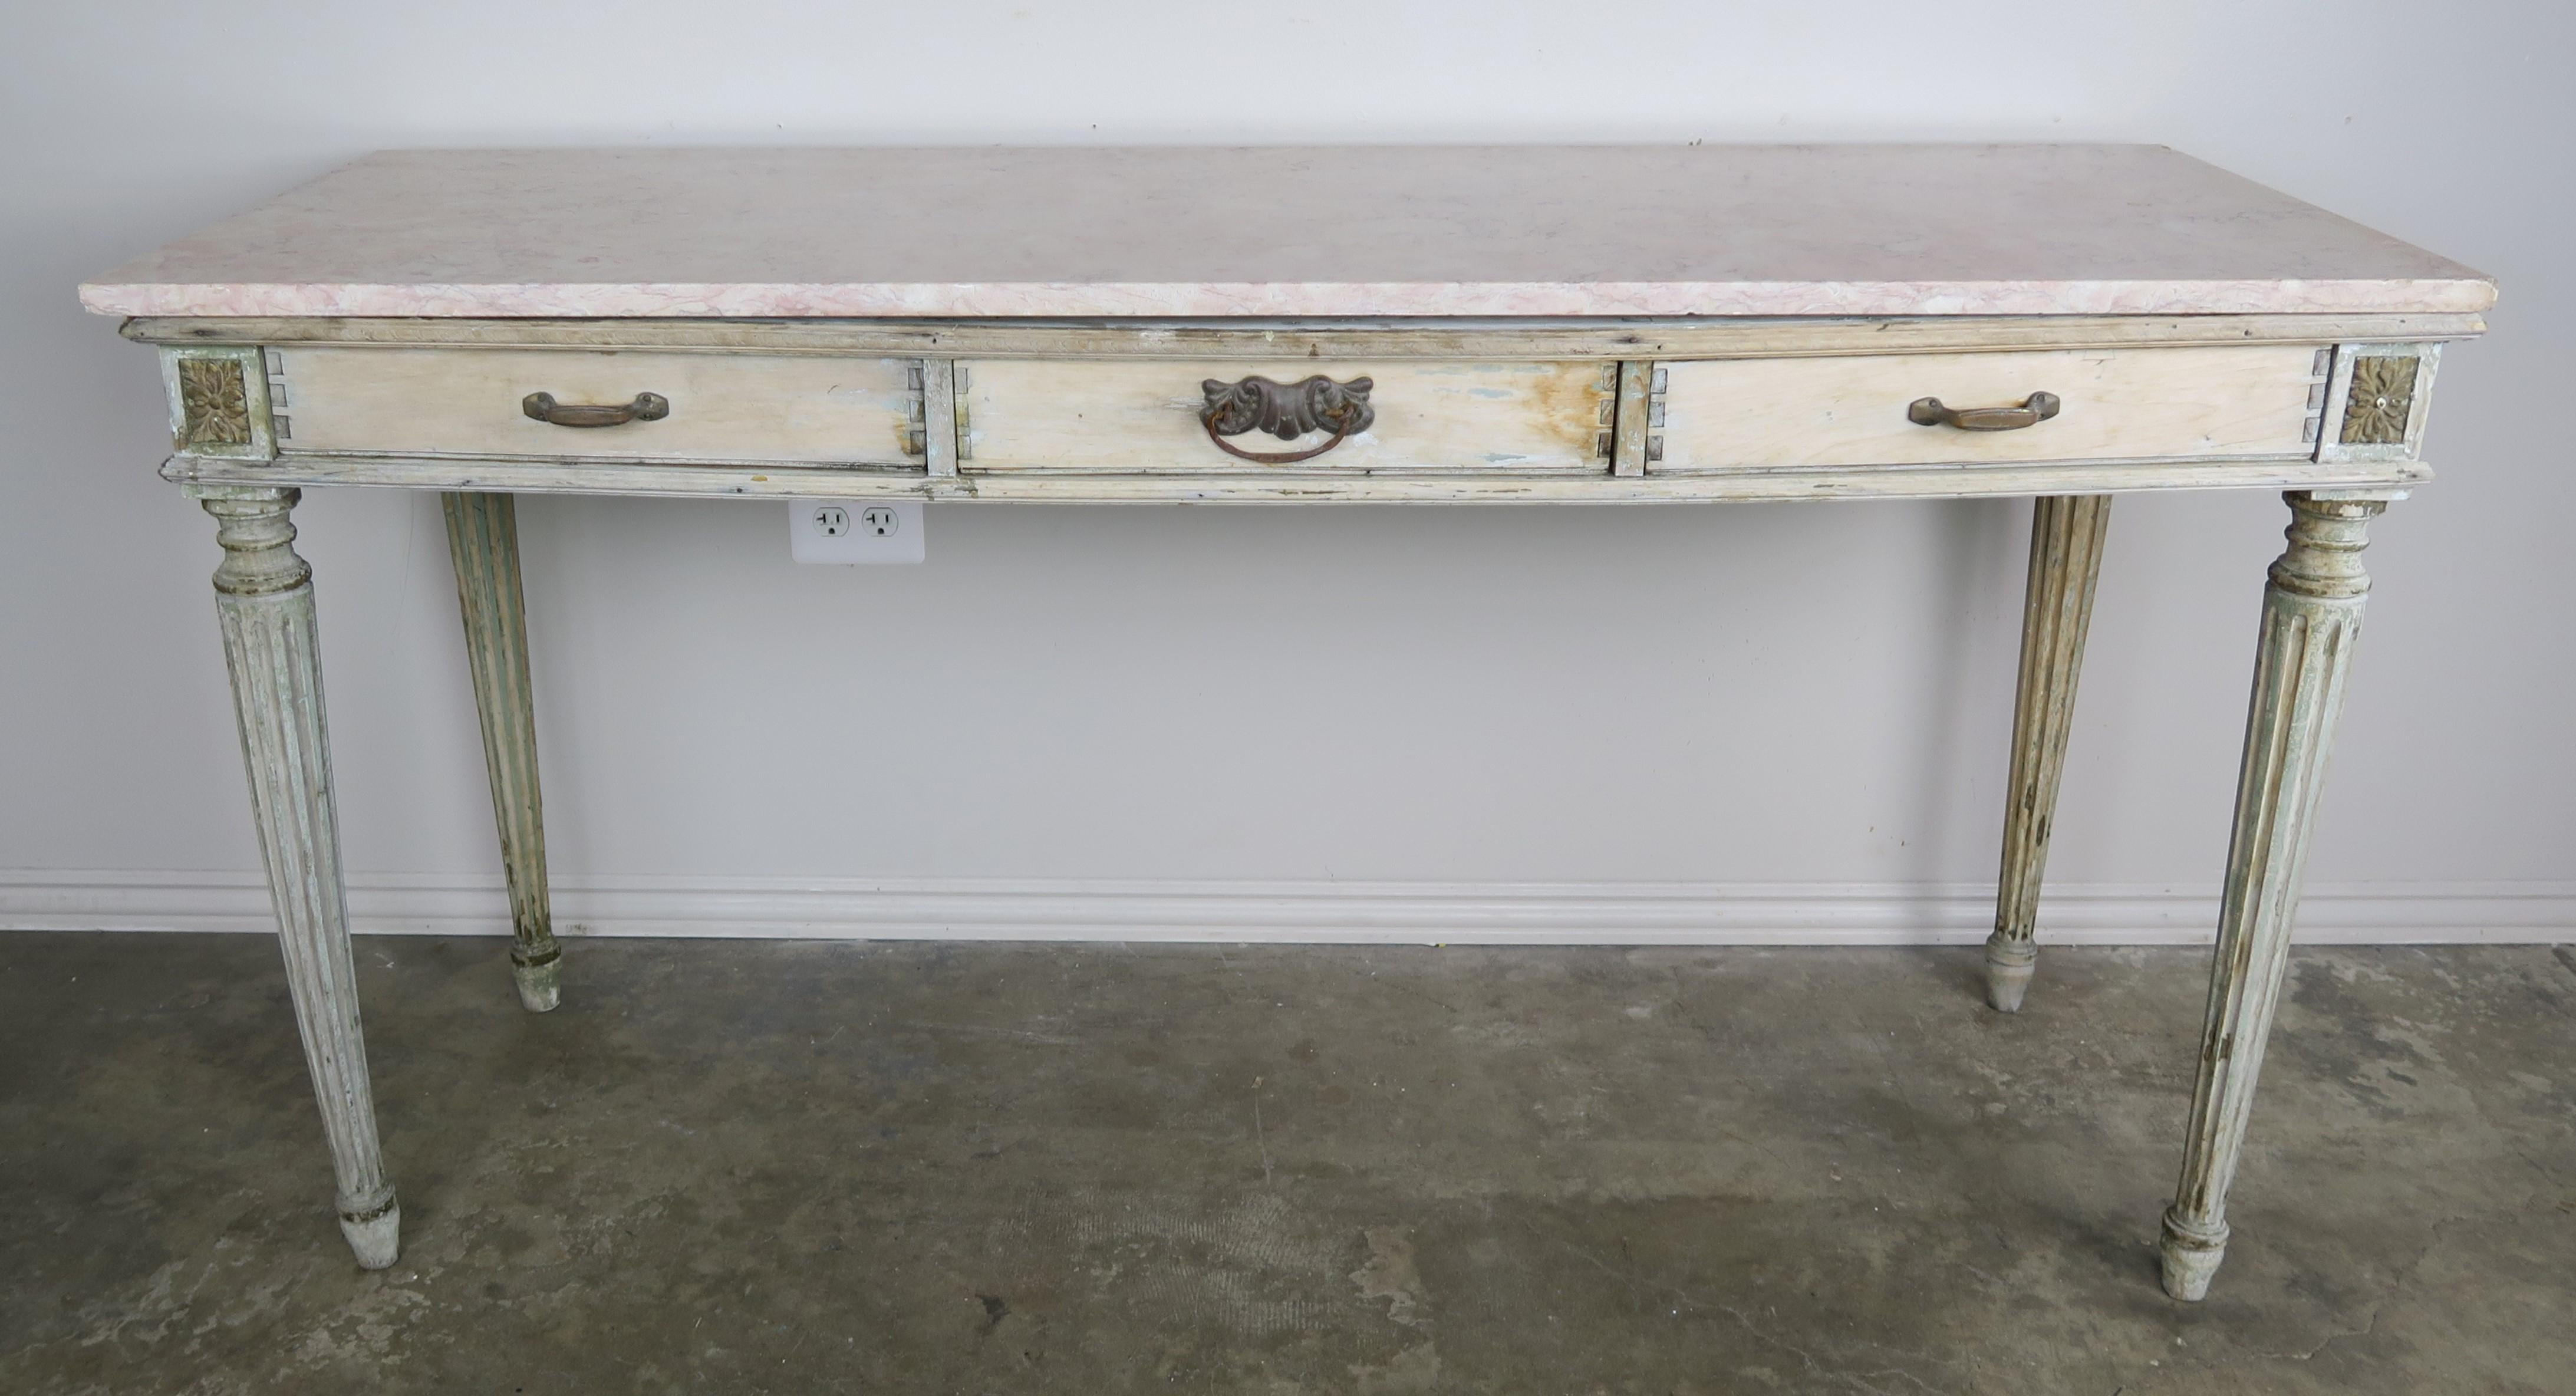 19th century French neoclassical style painted desk/writing table. The desk stand on four fluted straight legs and has three-drawer with dove-tailing. The top is a creamy rose colored marble. Original brass hardware.